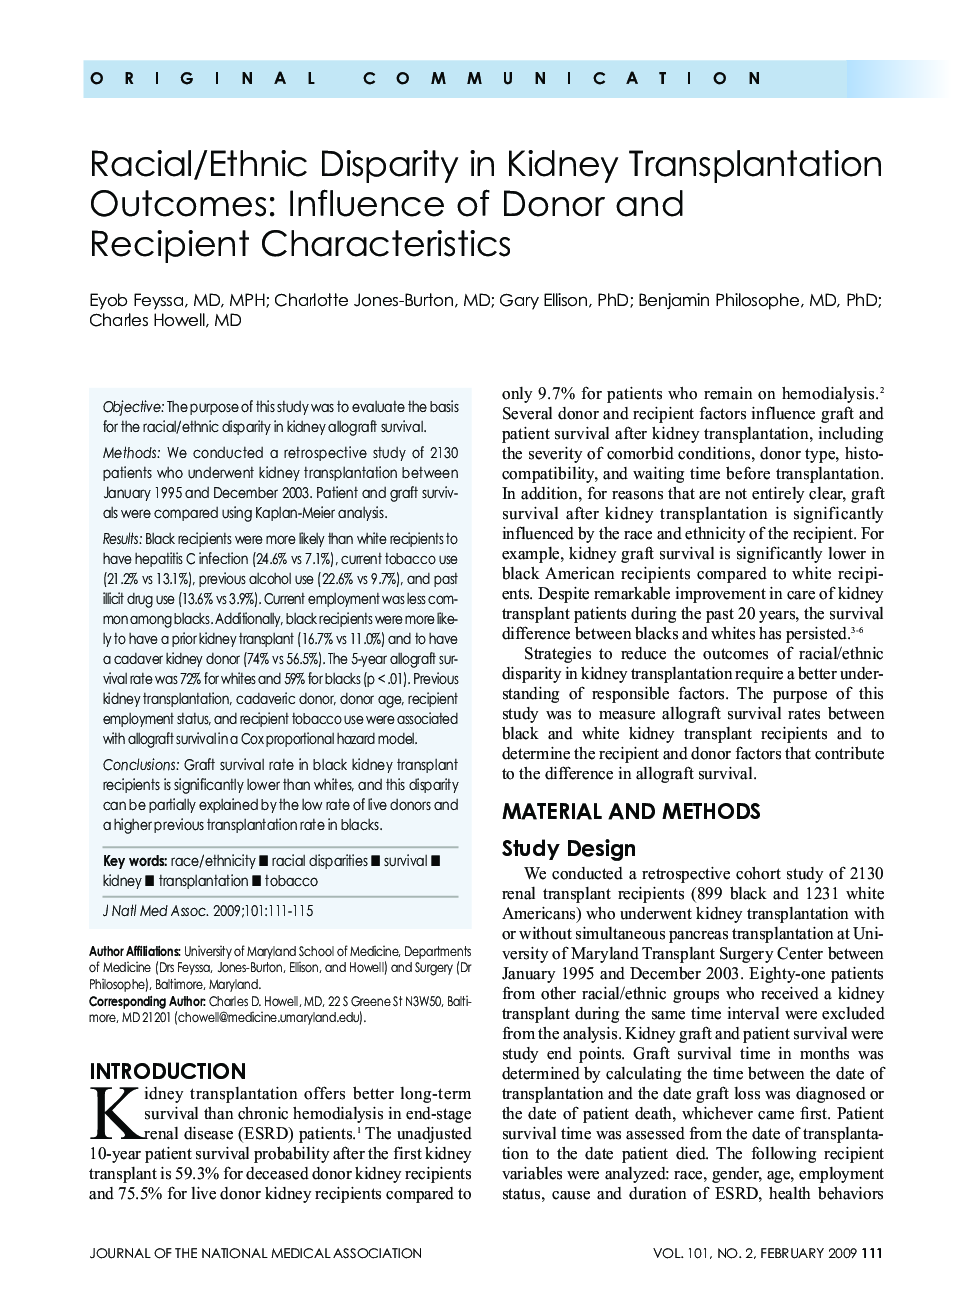 Racial/Ethnic Disparity in Kidney Transplantation Outcomes: Influence of Donor andRecipient Characteristics